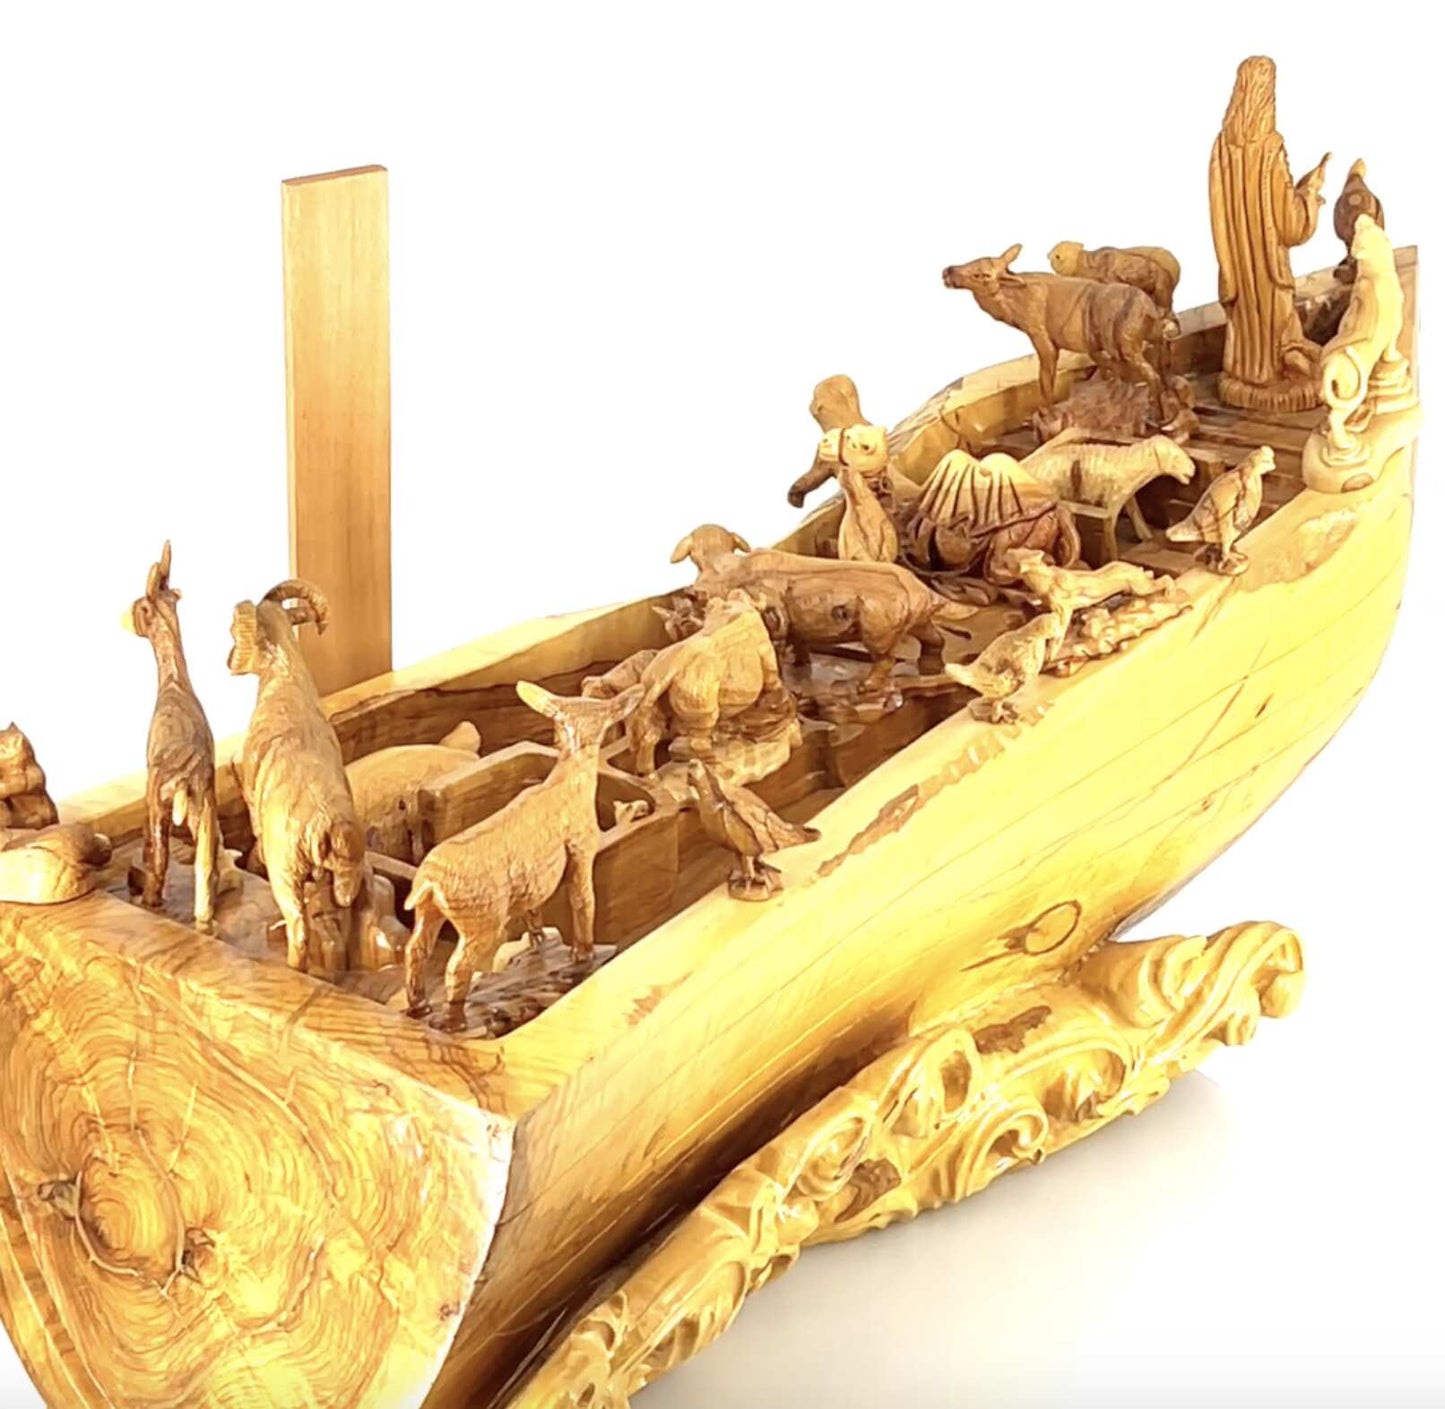 Noah's Ark with Carved Animals Figurines, 34" Long, Very Large Olive Wood Carving from Holy Land